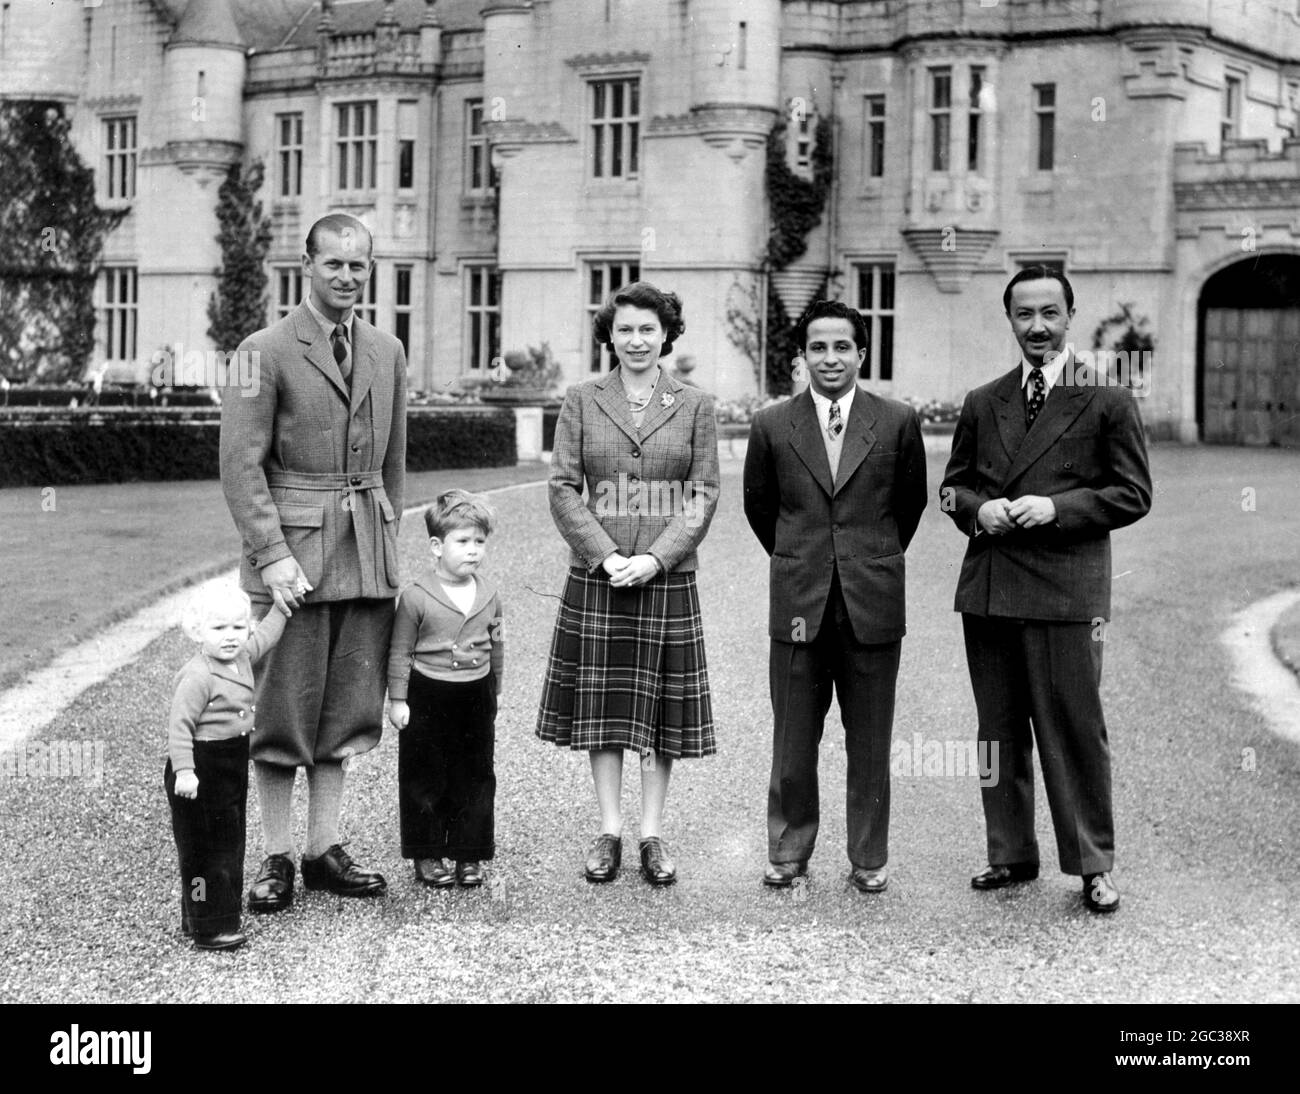 Balmoral, Scotland: The Duke of Edinburgh stands between Princess Ann and Prince Charles, as, together with Queen Elizabeth, they pose for their picture in the grounds of Balmoral Castle with 17-year old King Feisal of Iraq and his uncle, Emir Abdul Illah, the Prince Regent. The boy-King, an ex-Harrow schoolboy, is the guest of the Queen and Duke at Balmoral, their country home in Scotland. 26 September 1952 Stock Photo